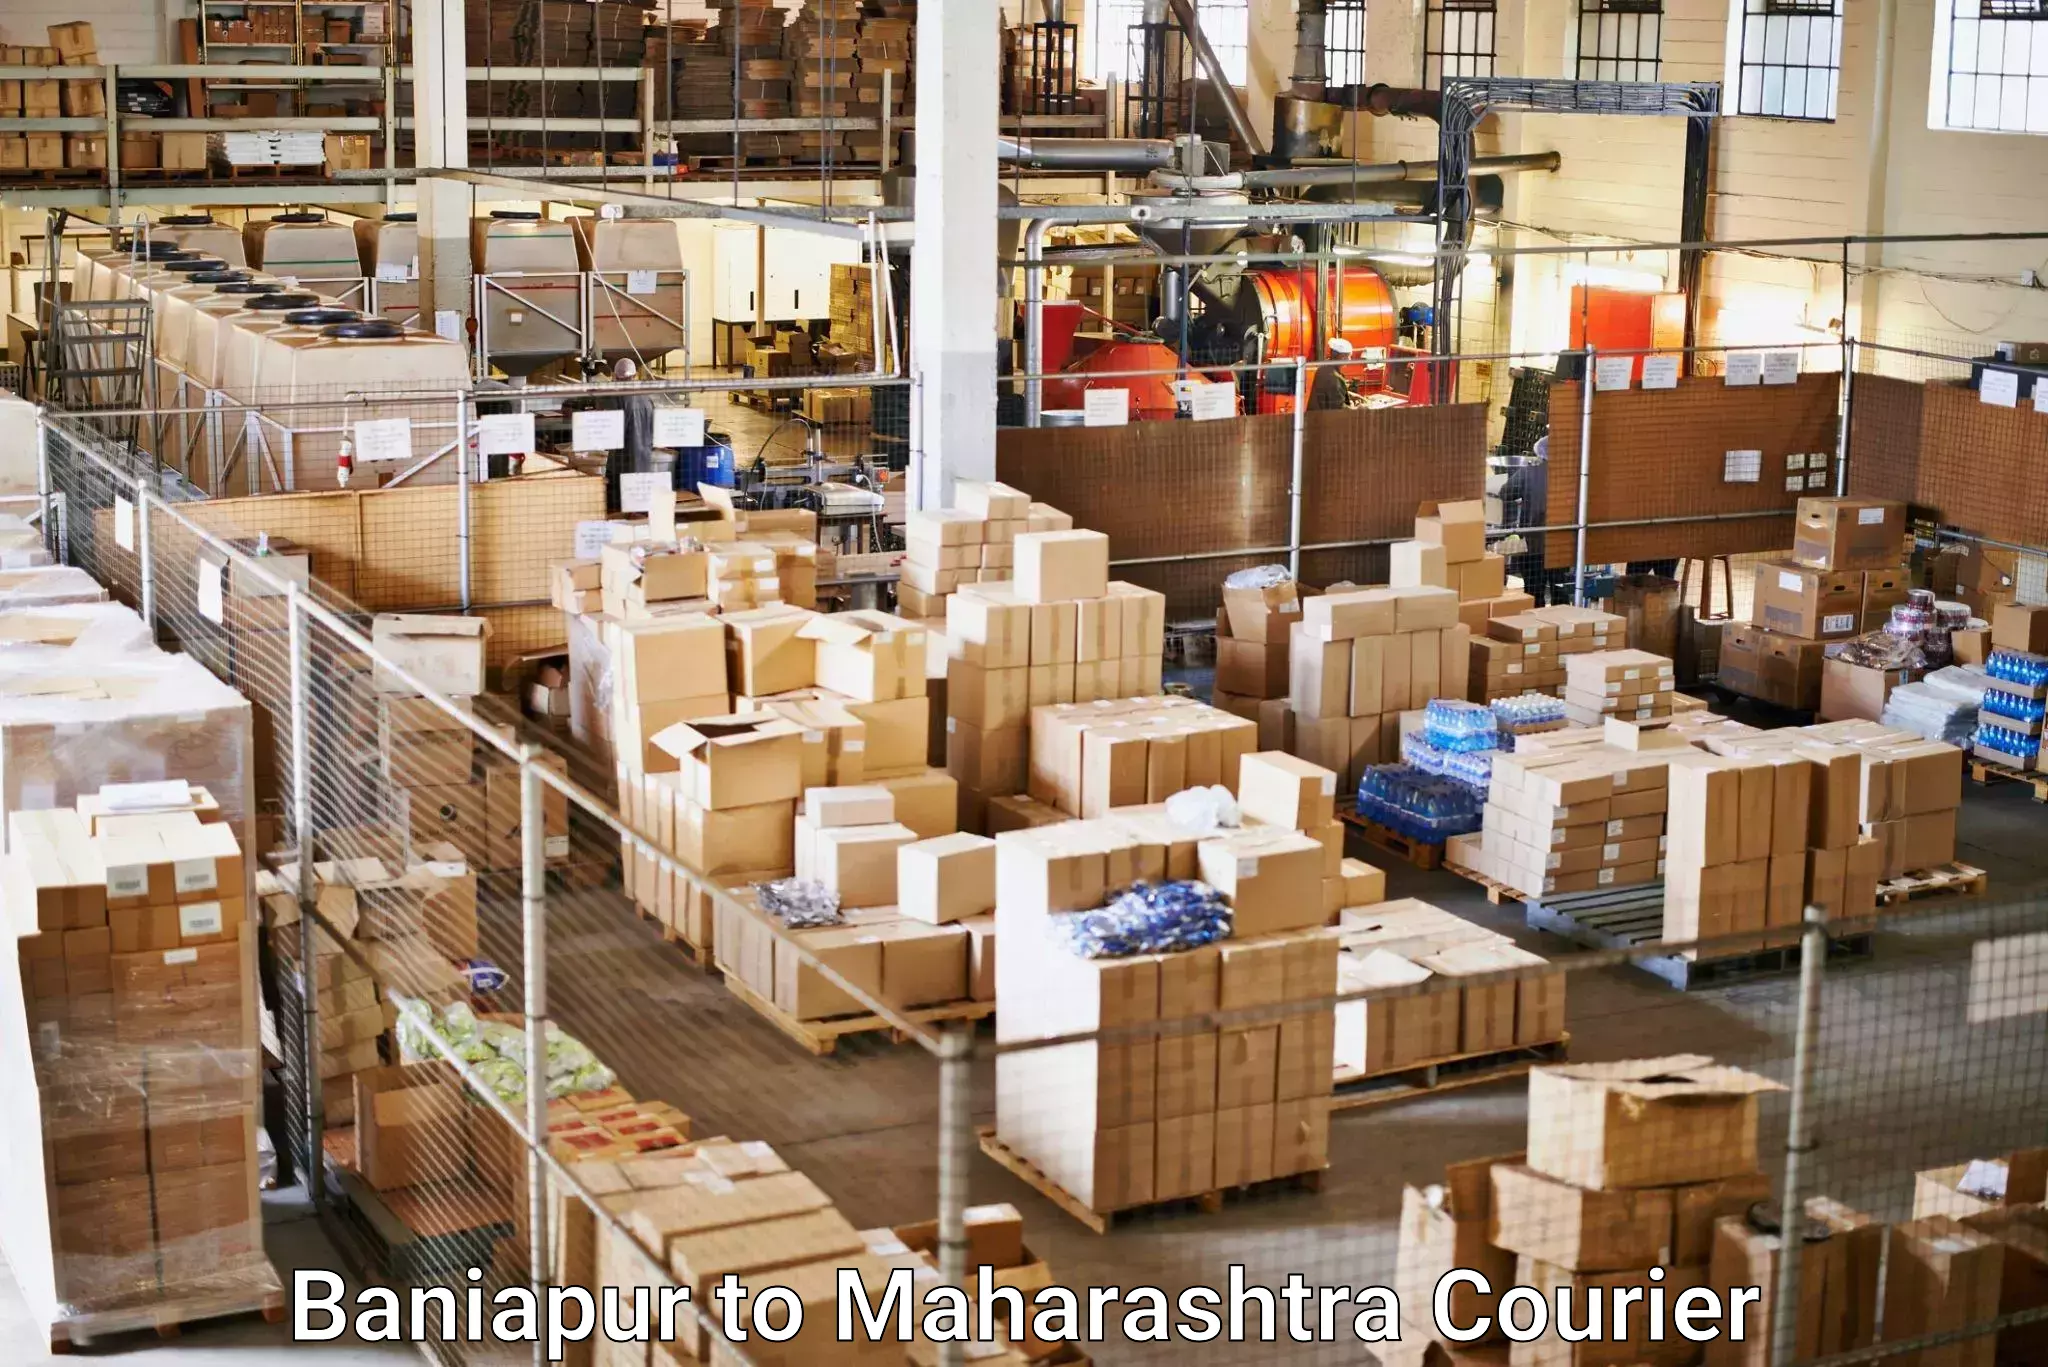 Supply chain delivery Baniapur to Kalyan Dombivli